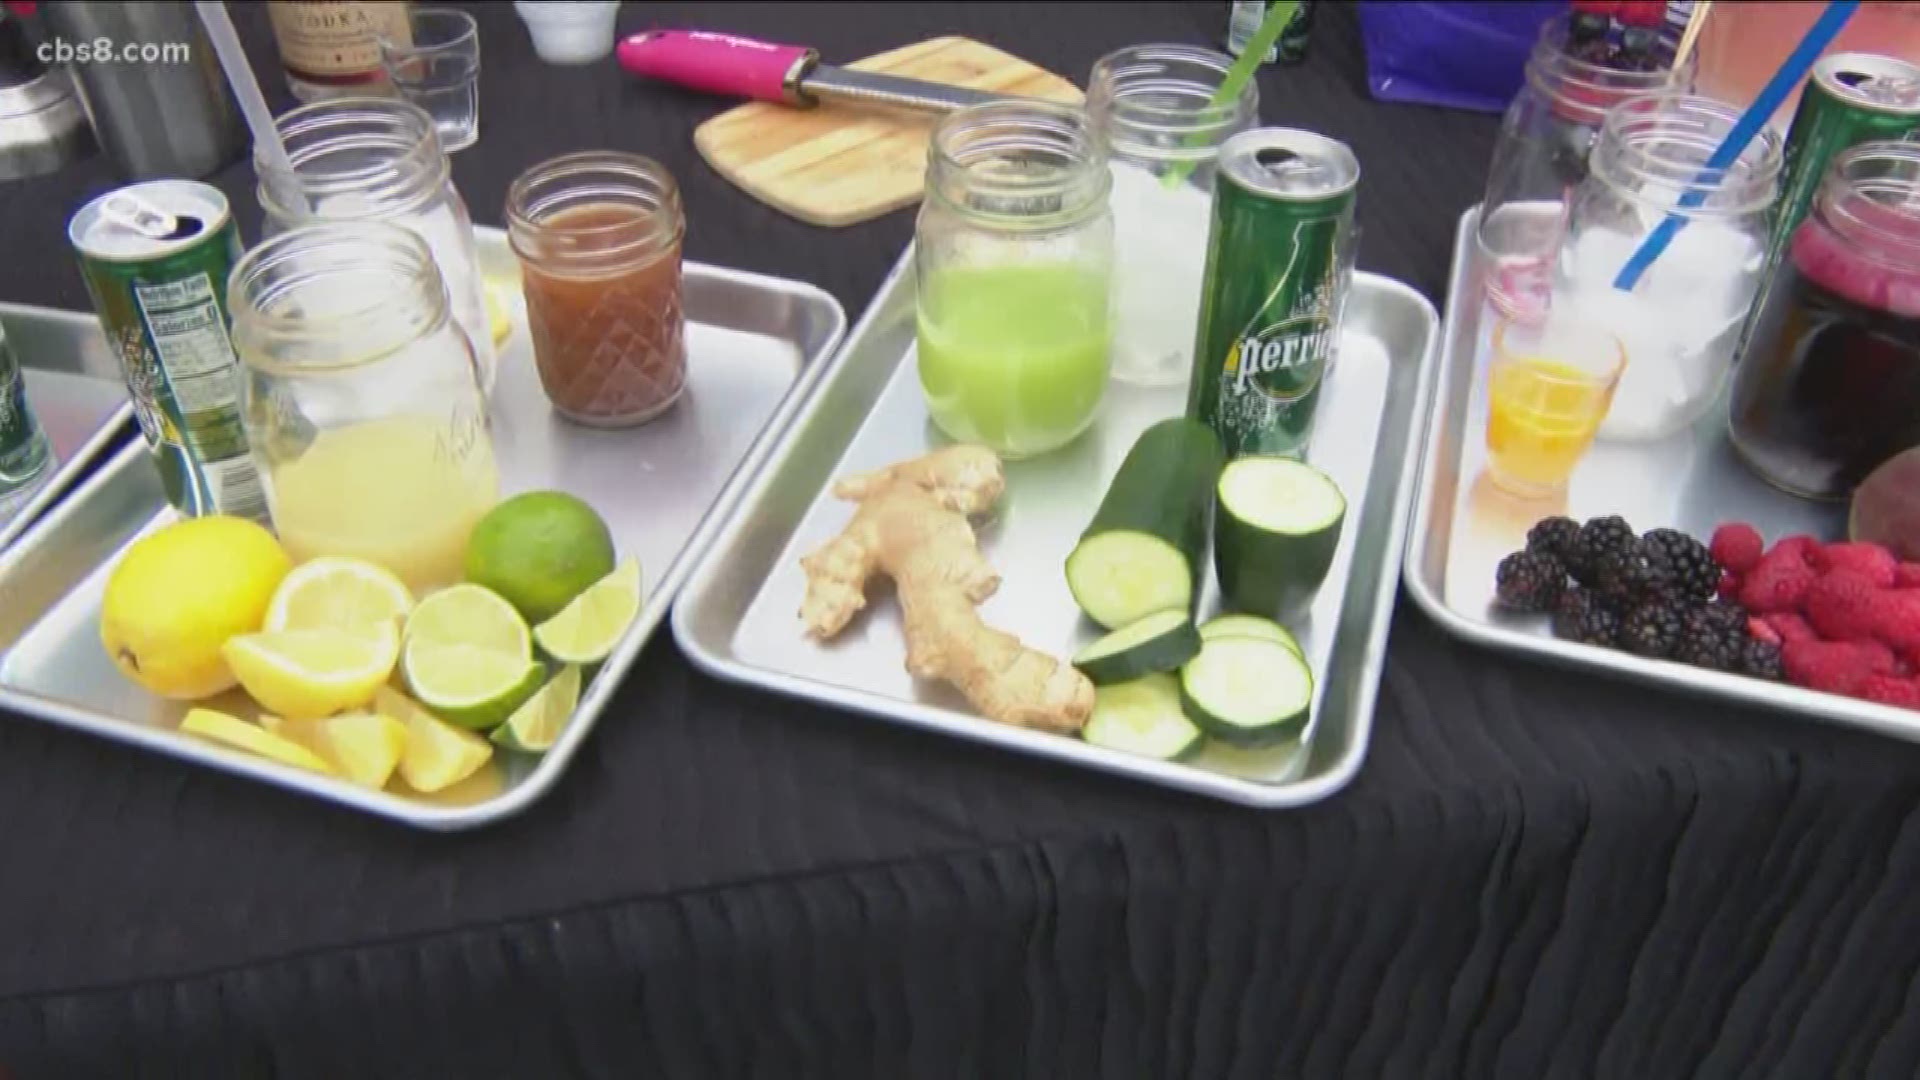 Teresa Marie Howes, a holistic nutritionist, self-proclaimed Veggie Ninja stopped by Morning Extra to show off some healthy Fourth of July beverages.